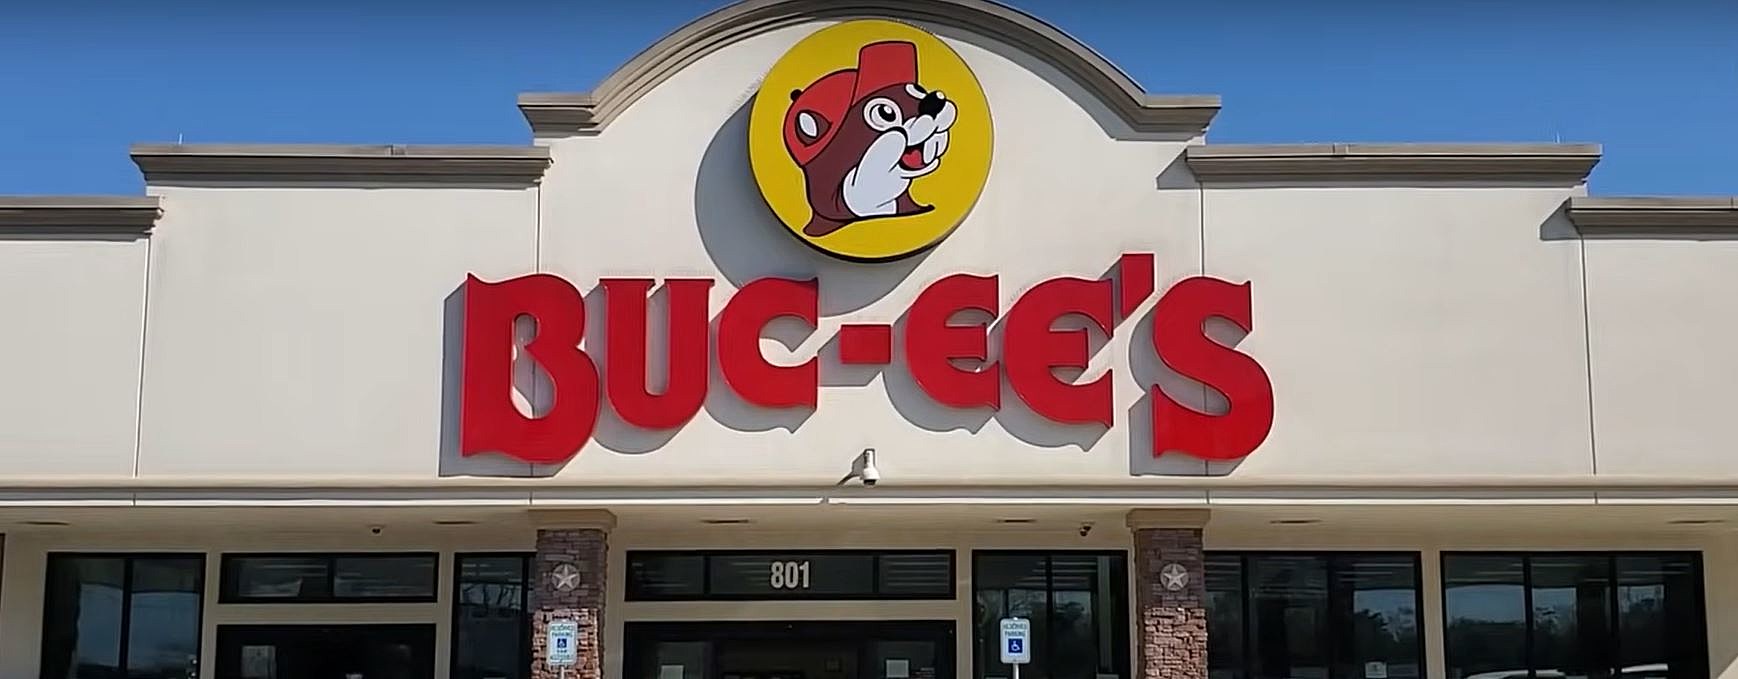 Iconic Southern Chain Buc-ee's Makes First Beachhead in Indiana